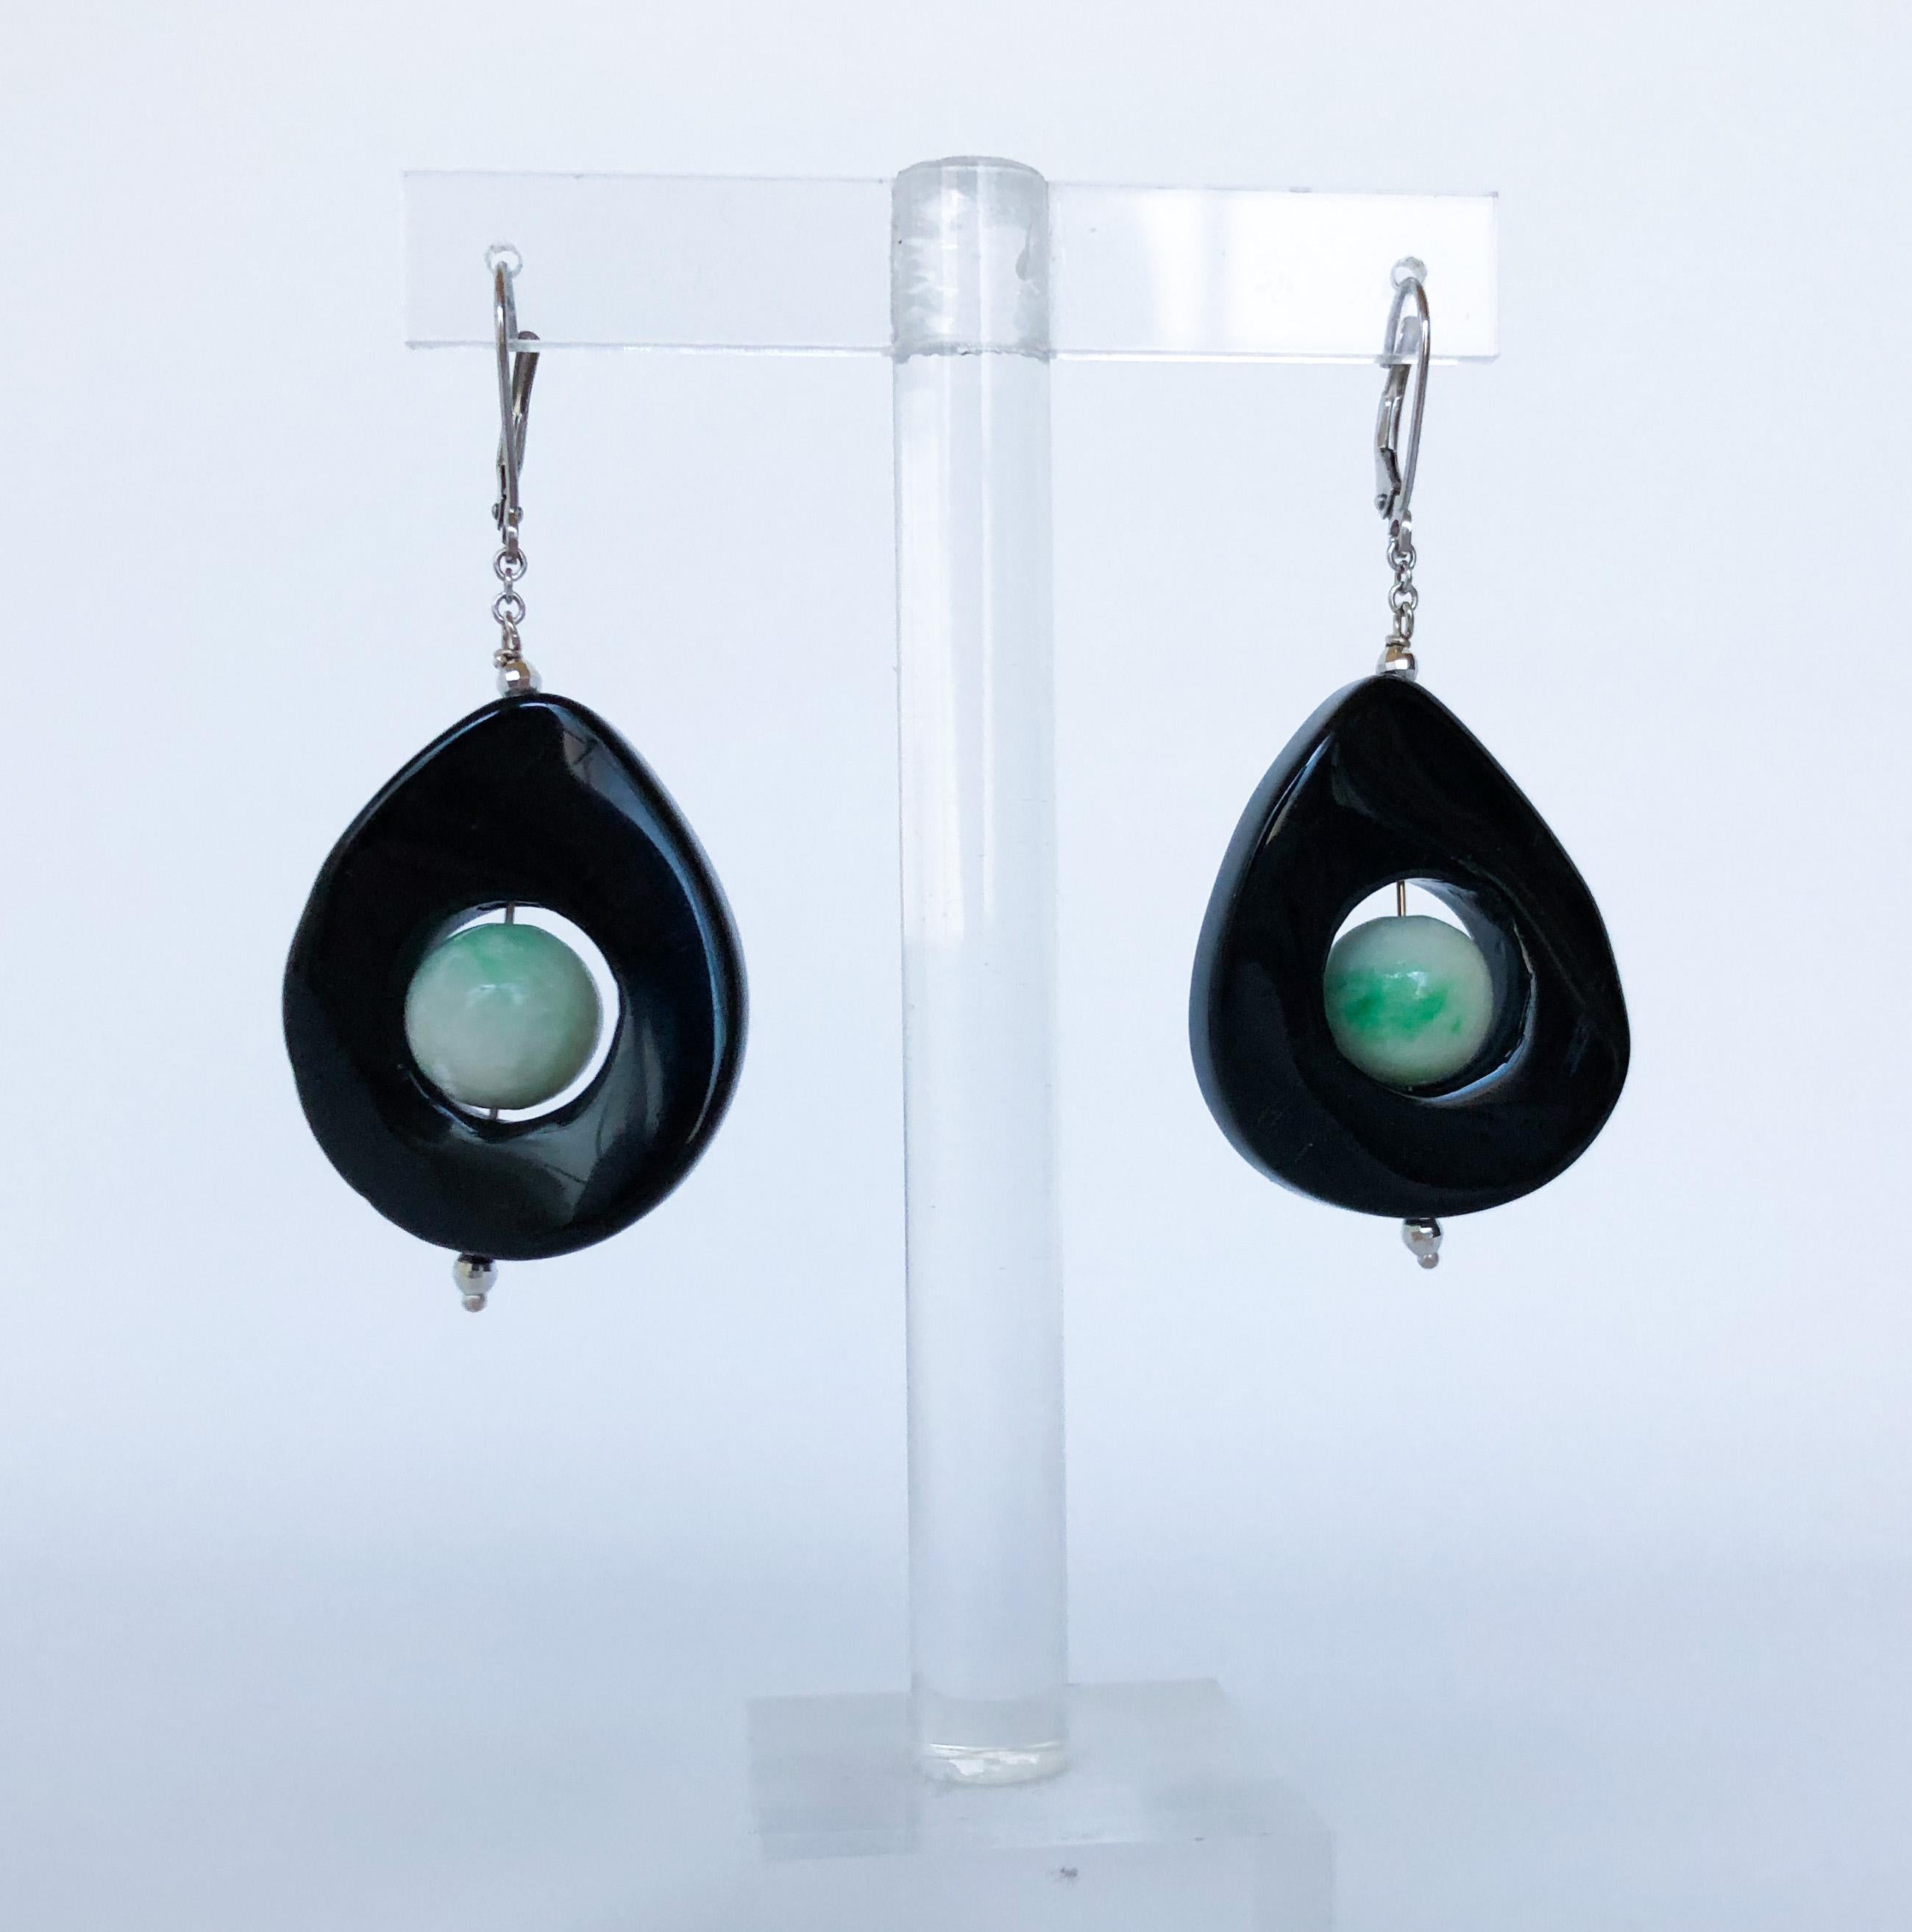 These earrings are made with jade circular beads and are enclosed in black onyx rings. There is a hint of shine from two tiny white gold beads. They measure about 2 inches long, which will hang beautifully and compliment any look. The wiring and